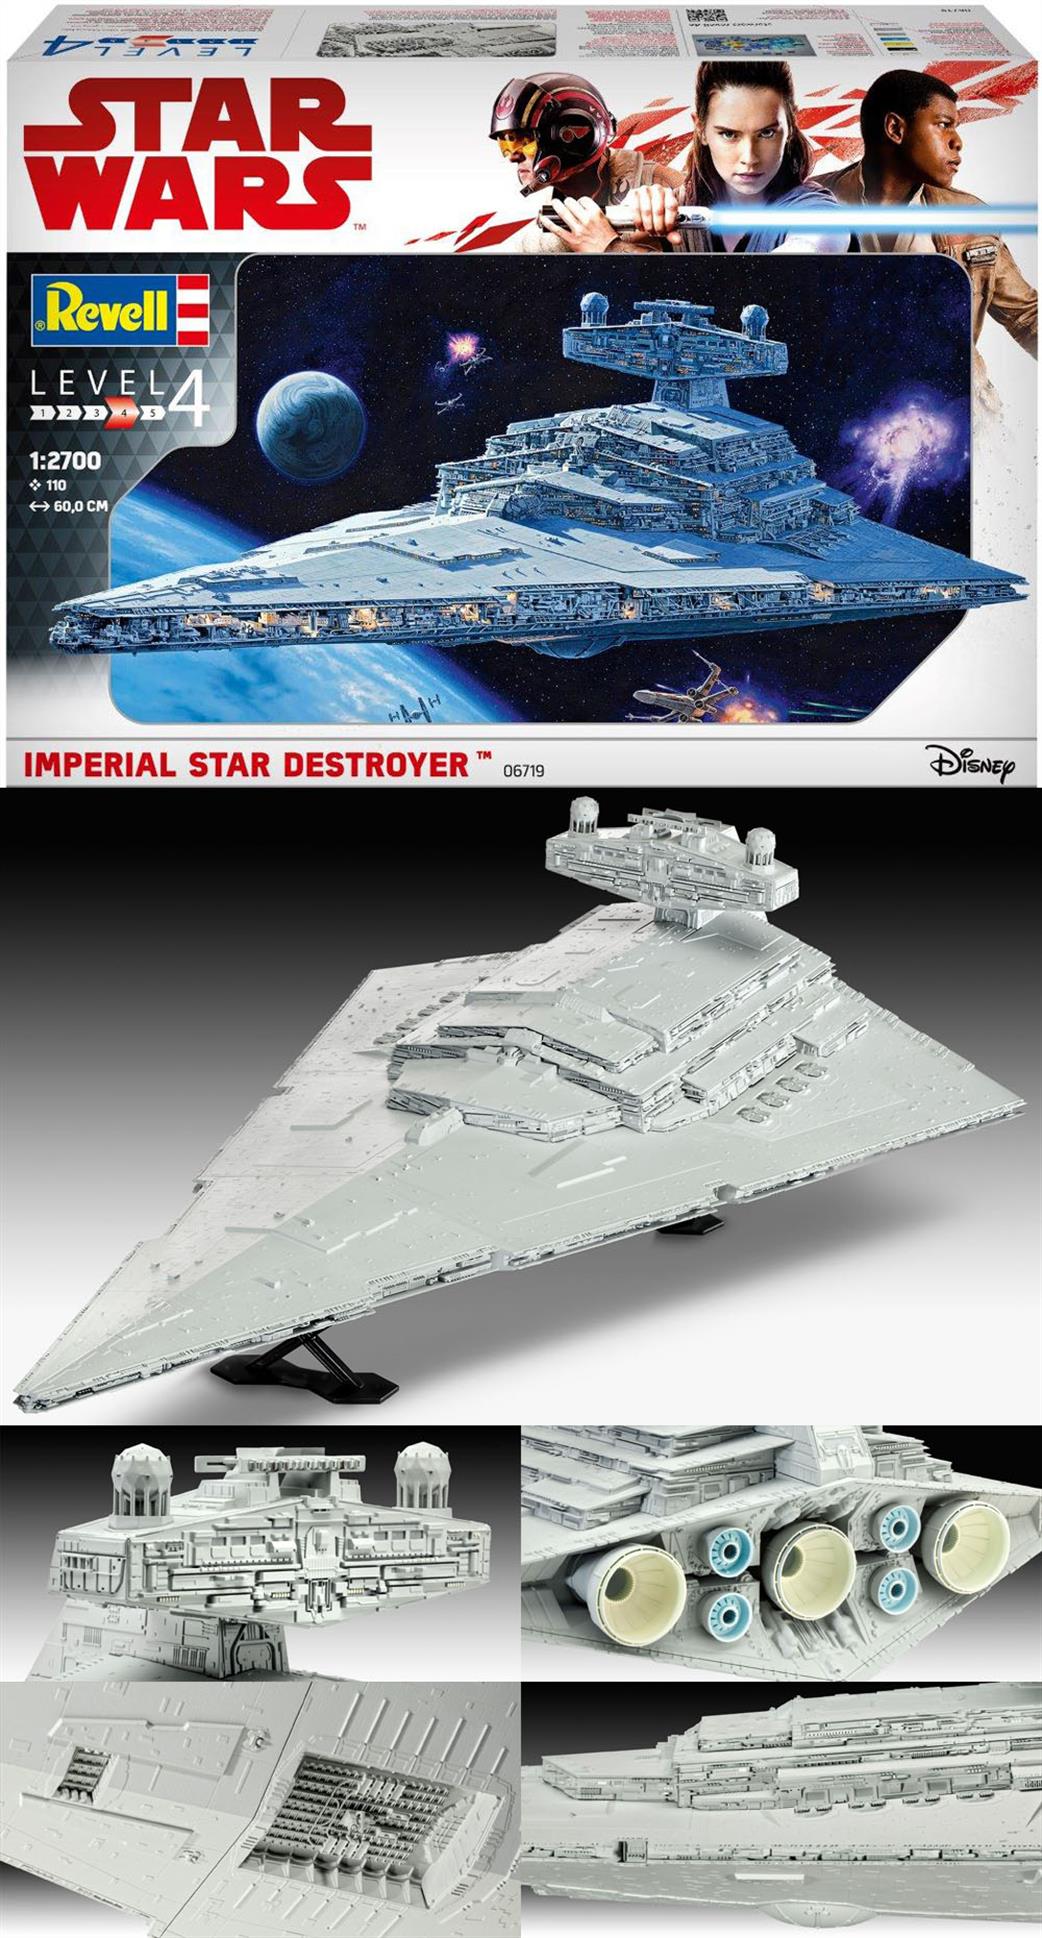 Revell 1/2700 06719 Imperial Star Destroyer from Star Wars